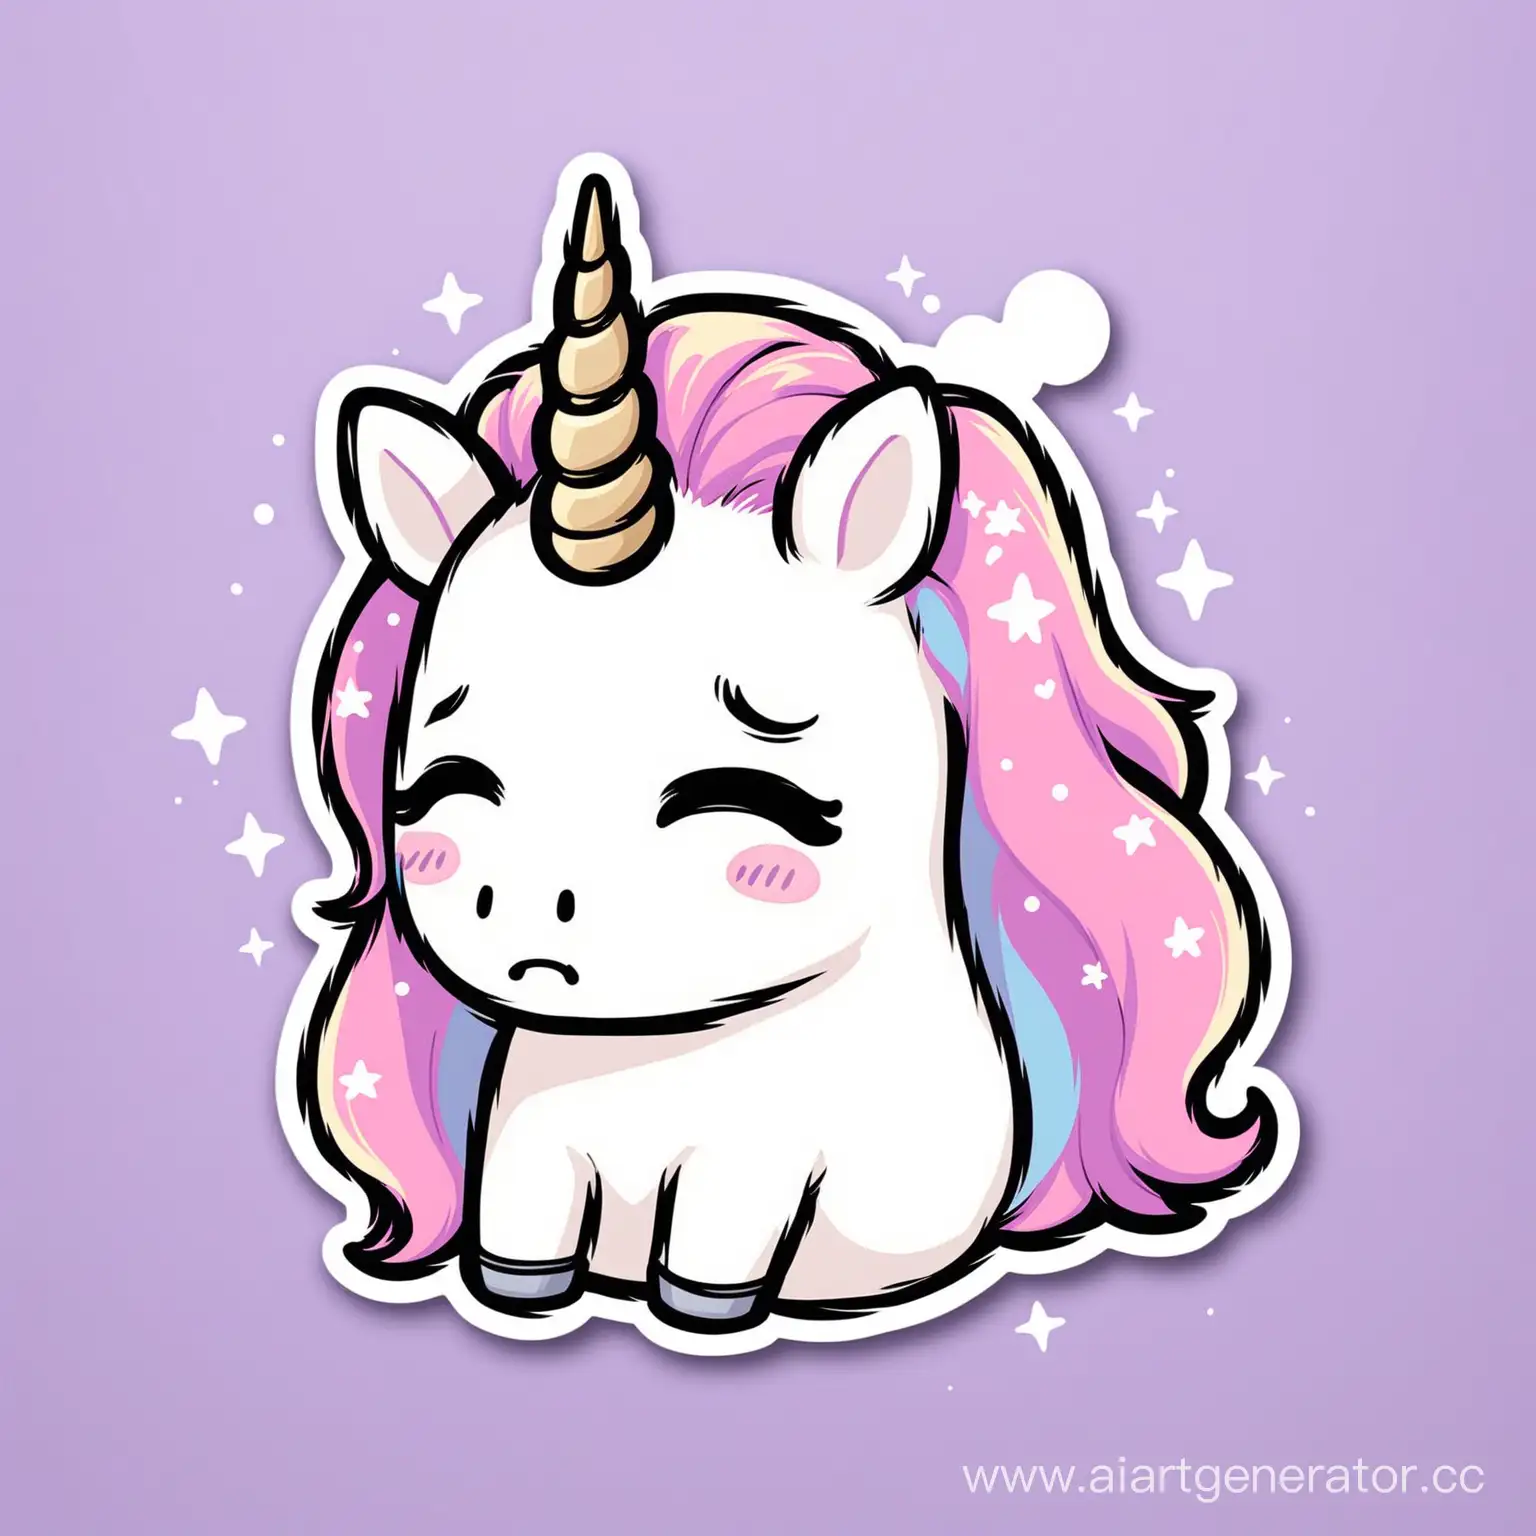 Lonely-Unicorn-Sticker-in-Grieving-Pose